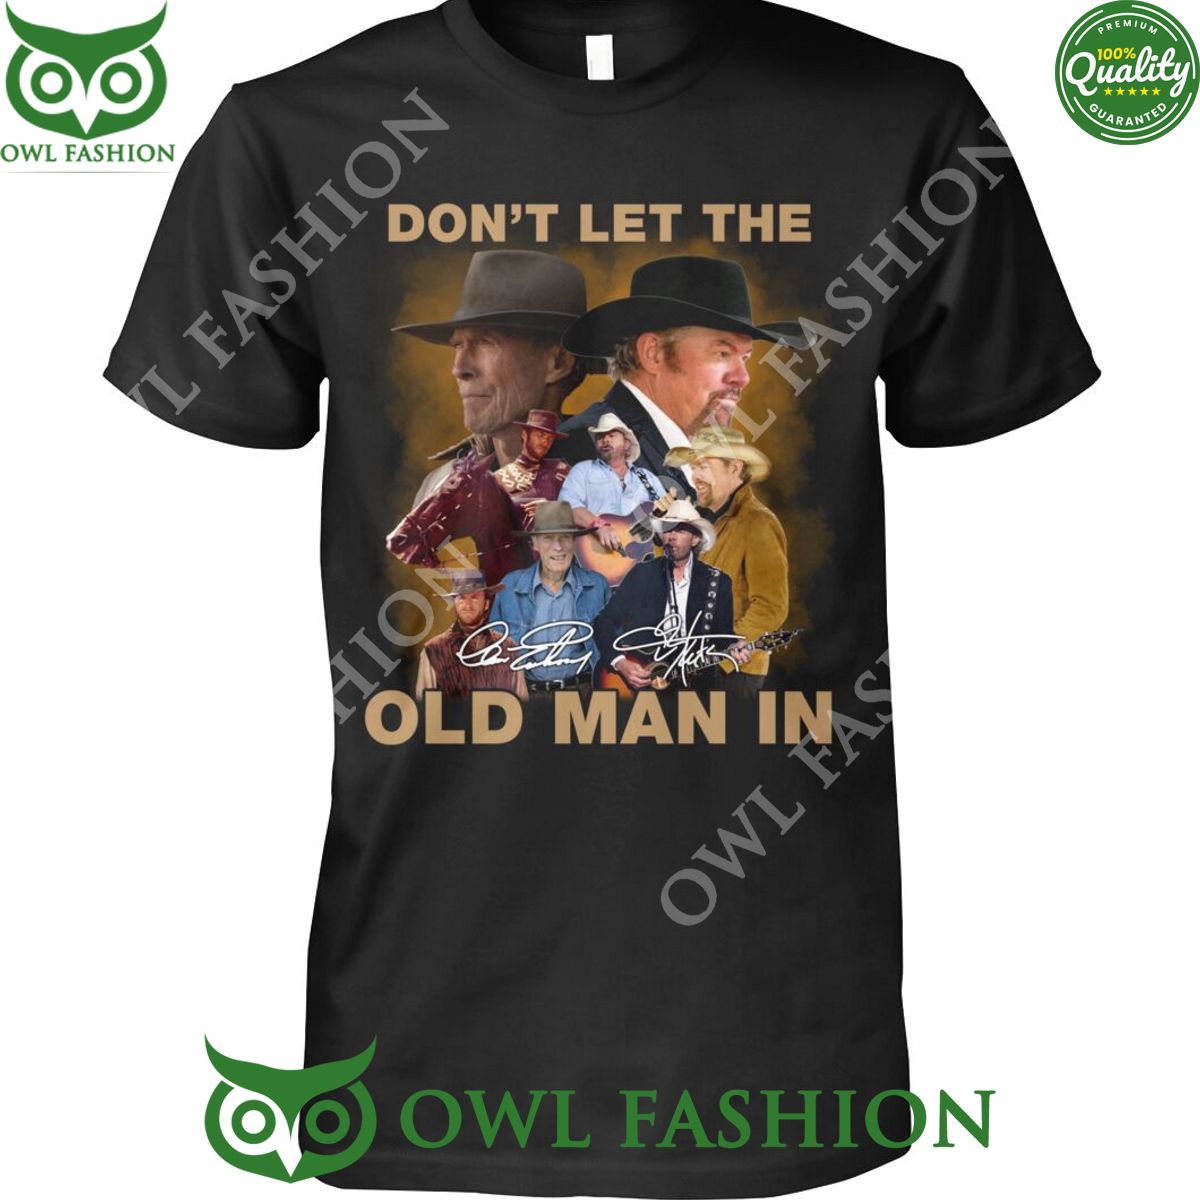 Famous Song dont let me old man in Toby Keith t shirt